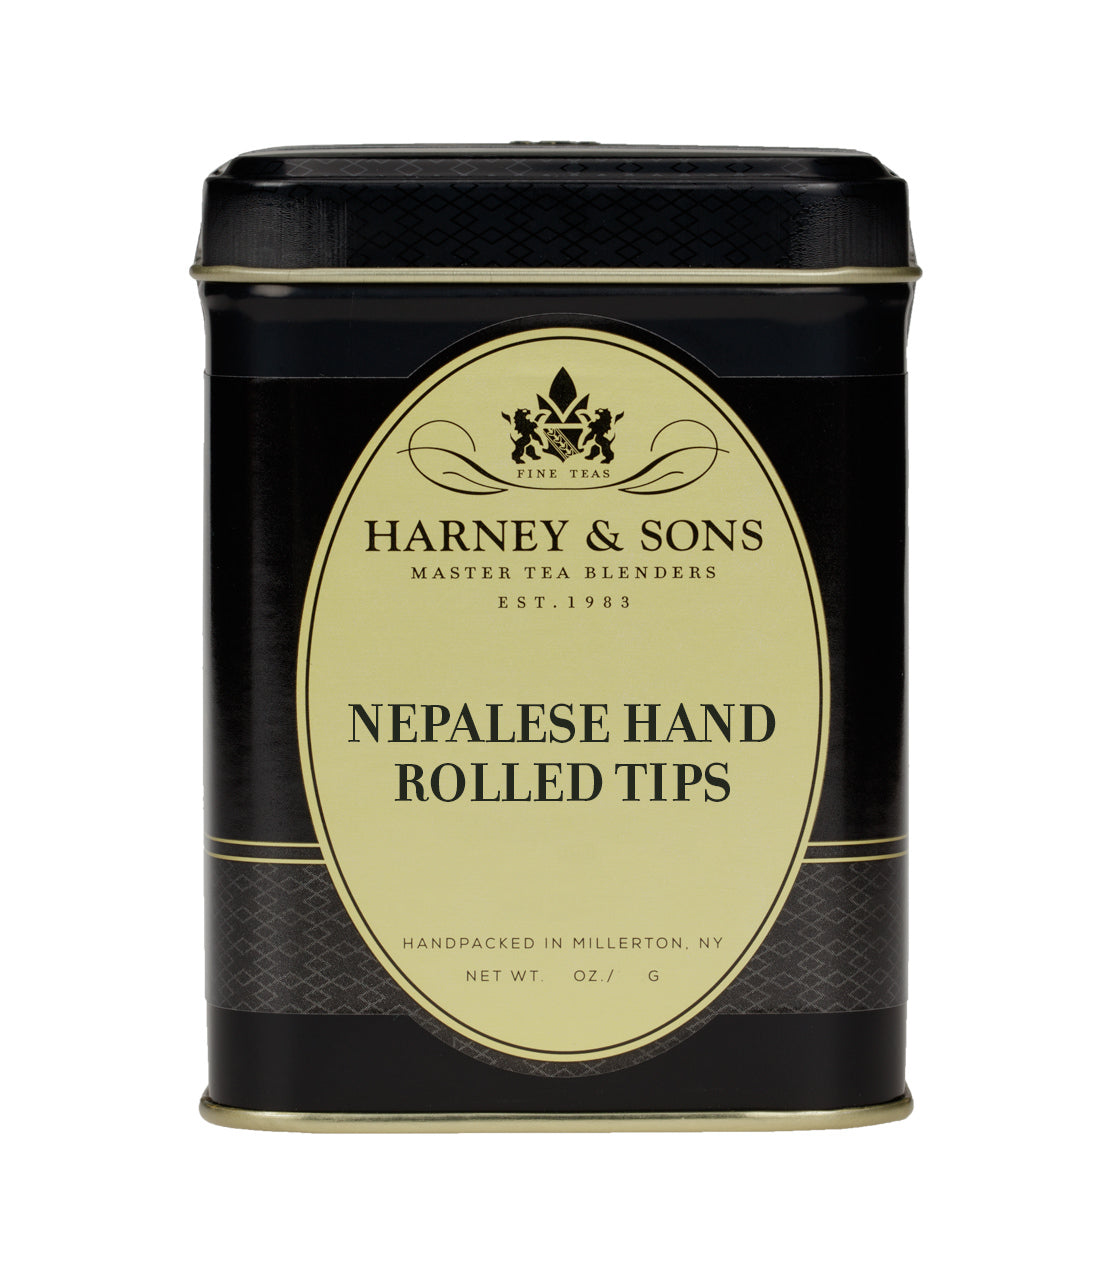 Nepalese Hand Rolled Tips -   - Harney & Sons Fine Teas